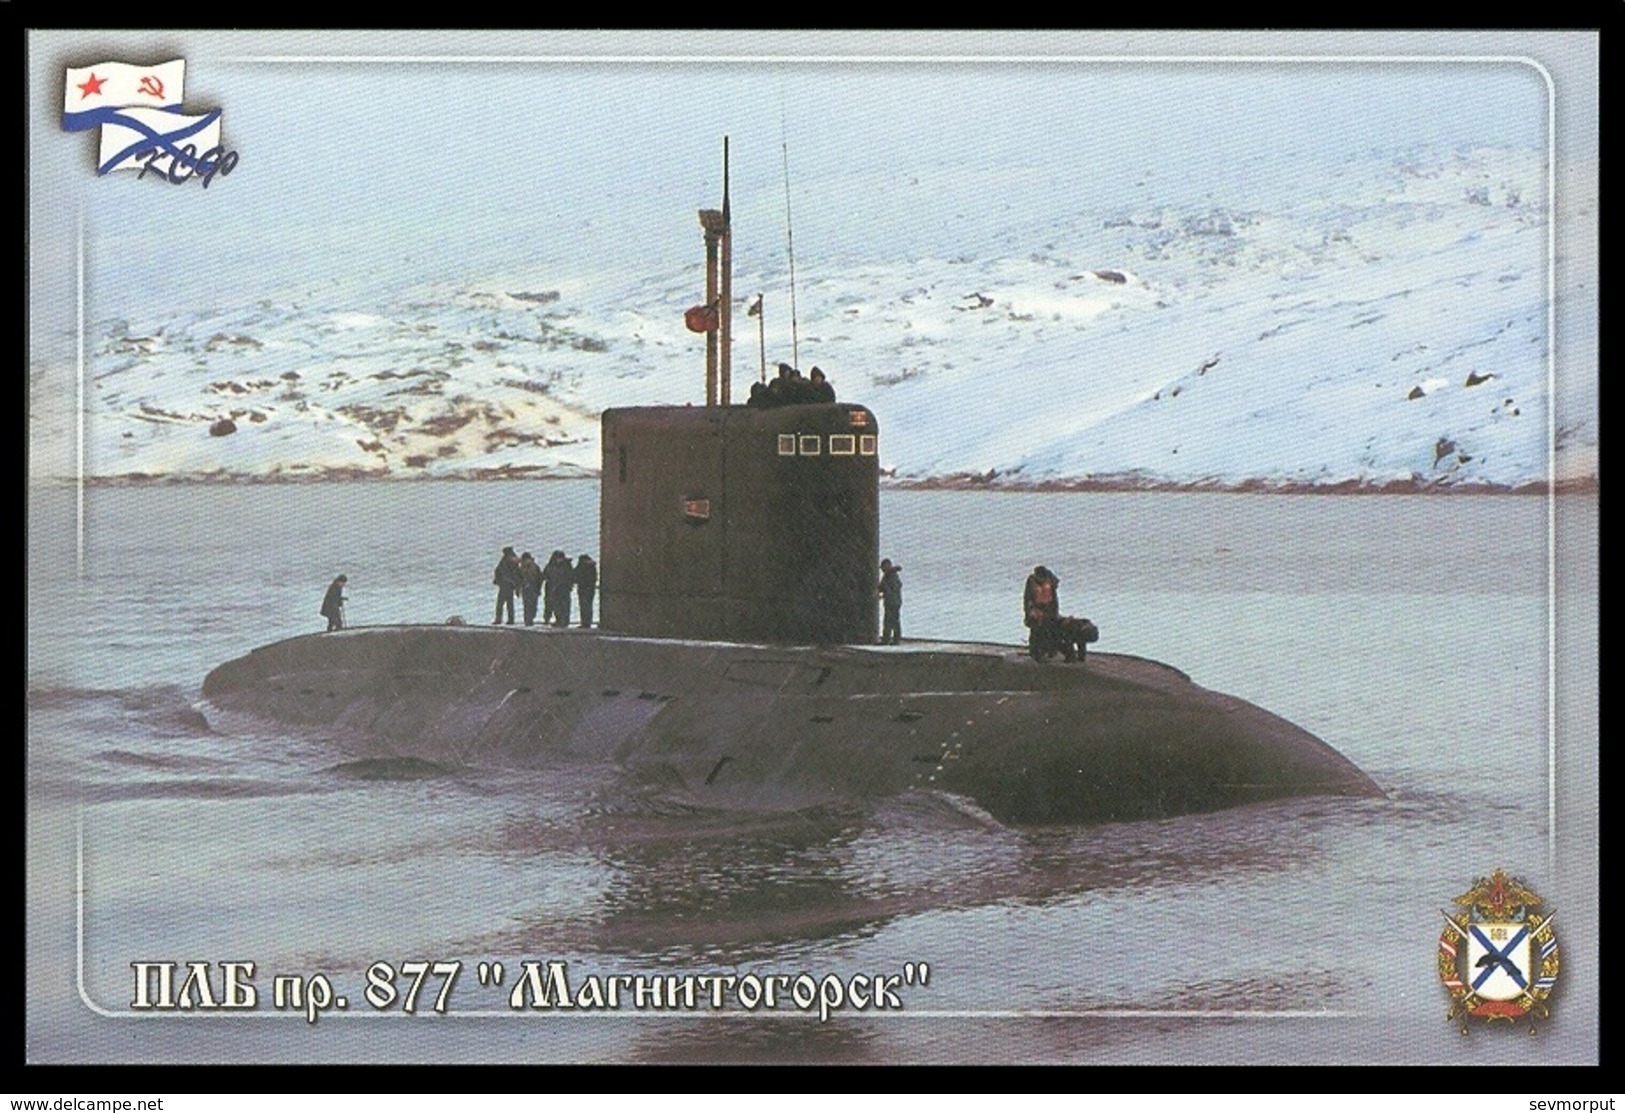 RUSSIA POSTCARD 3665 Mint SUBMARINE 877 "MAGNITOGORSK" SOUS MARIN U BOOT NAVY NAVAL ARCTIC POLAR NORD ARCTIQUE POLAIRE - Unterseeboote